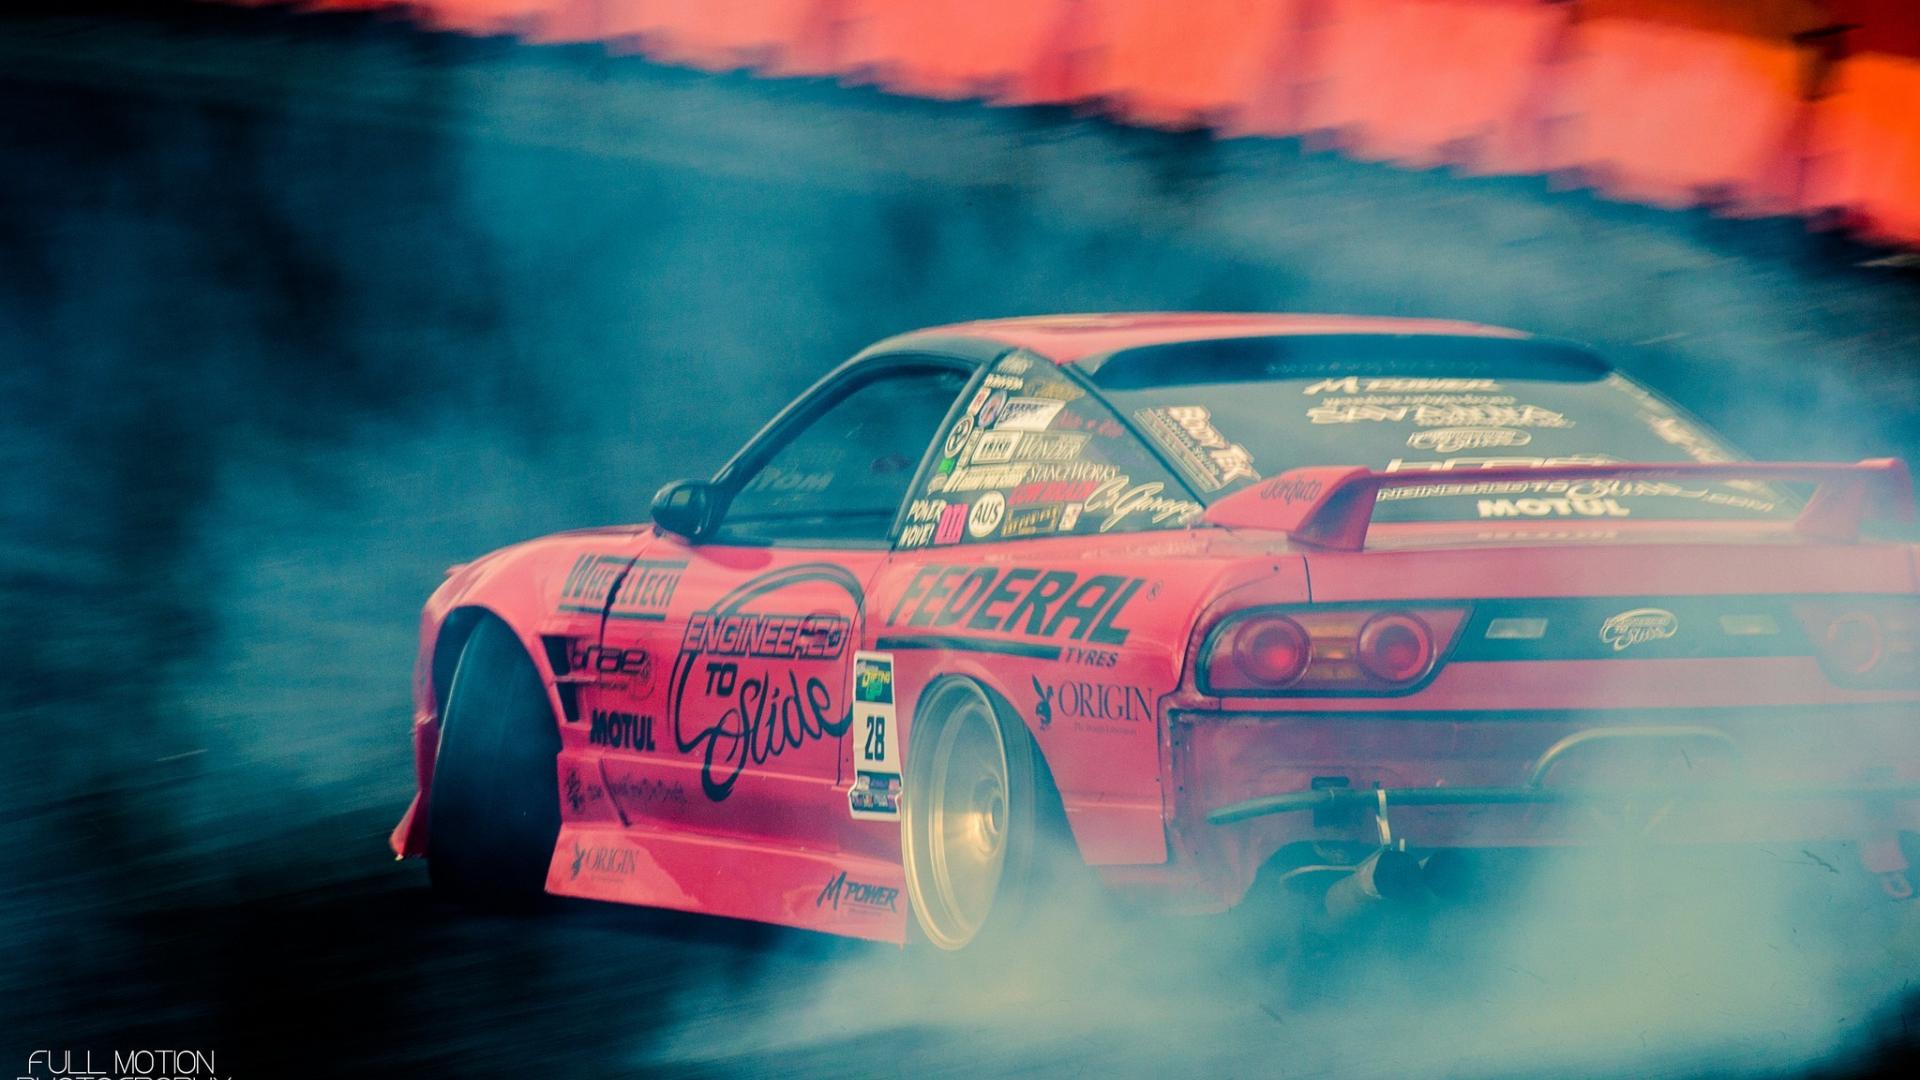 modified drifting cars wallpapers